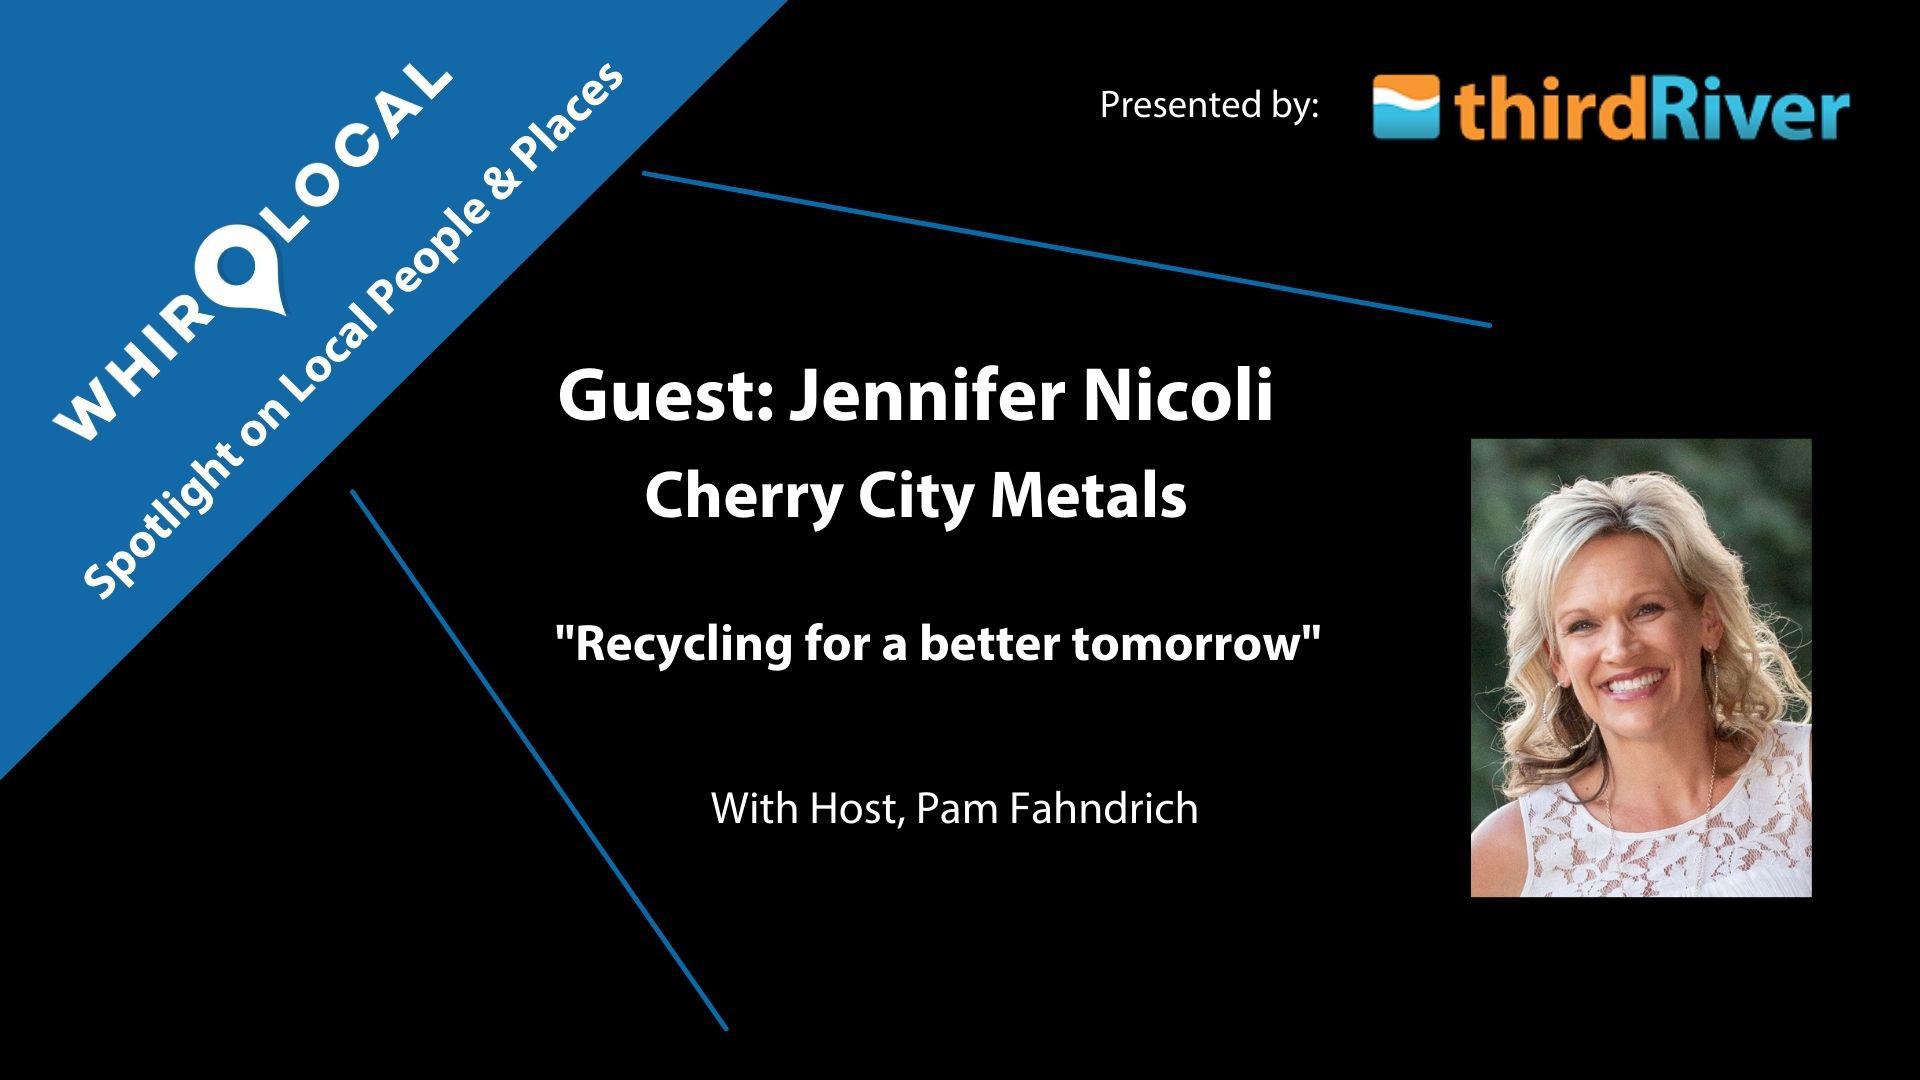 Interview with Jennifer Nicoli with Cherry City Metals